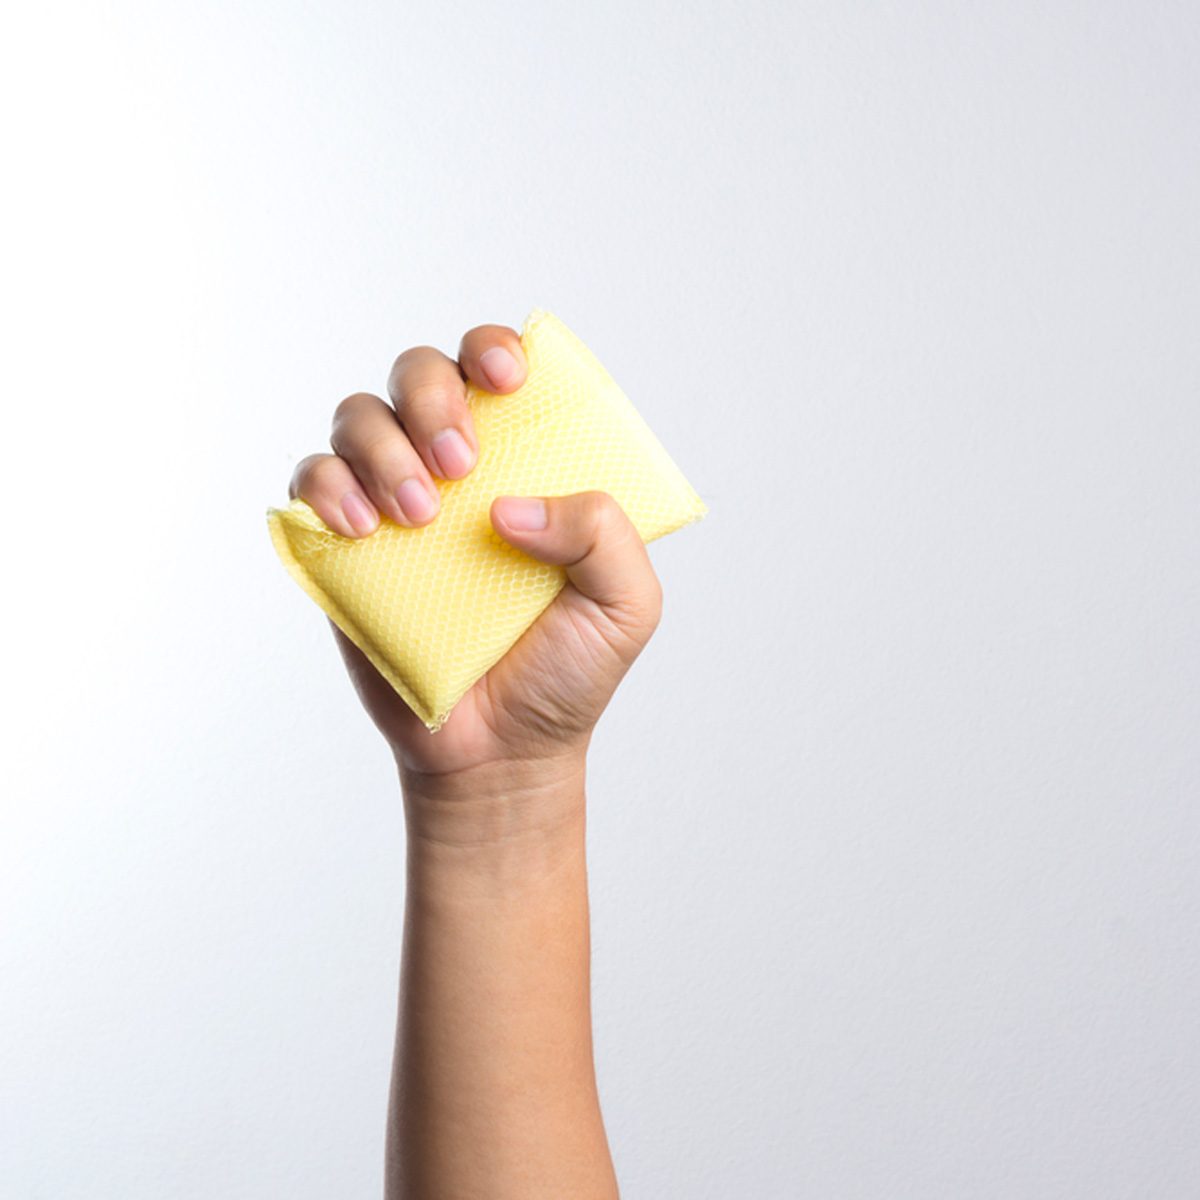 how to keep sponges from smelling